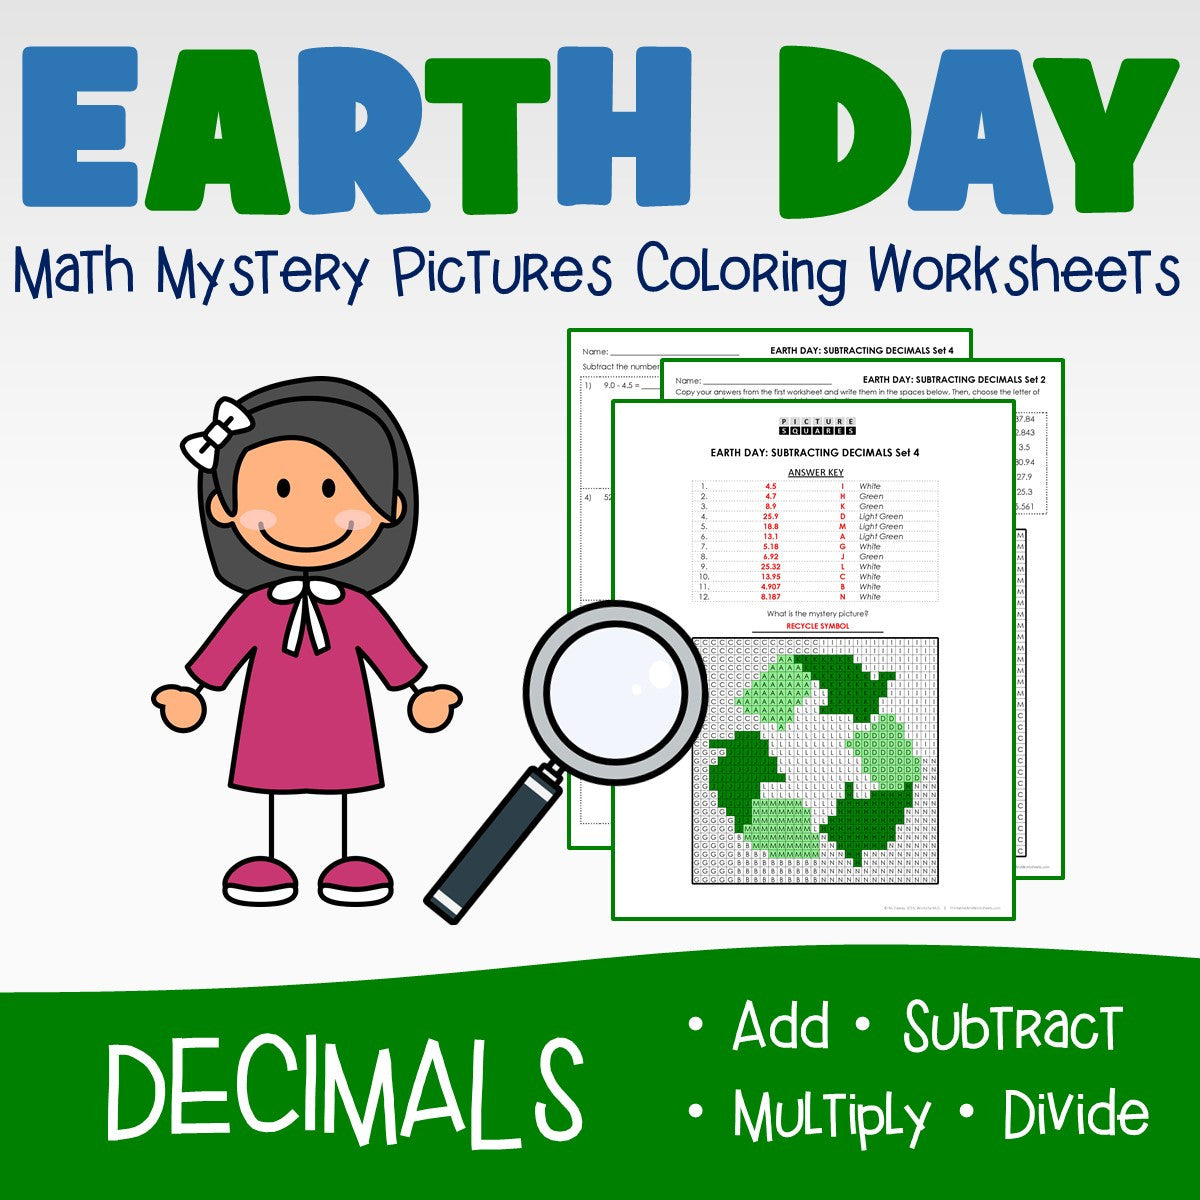 Earth Day Decimals Coloring Worksheets